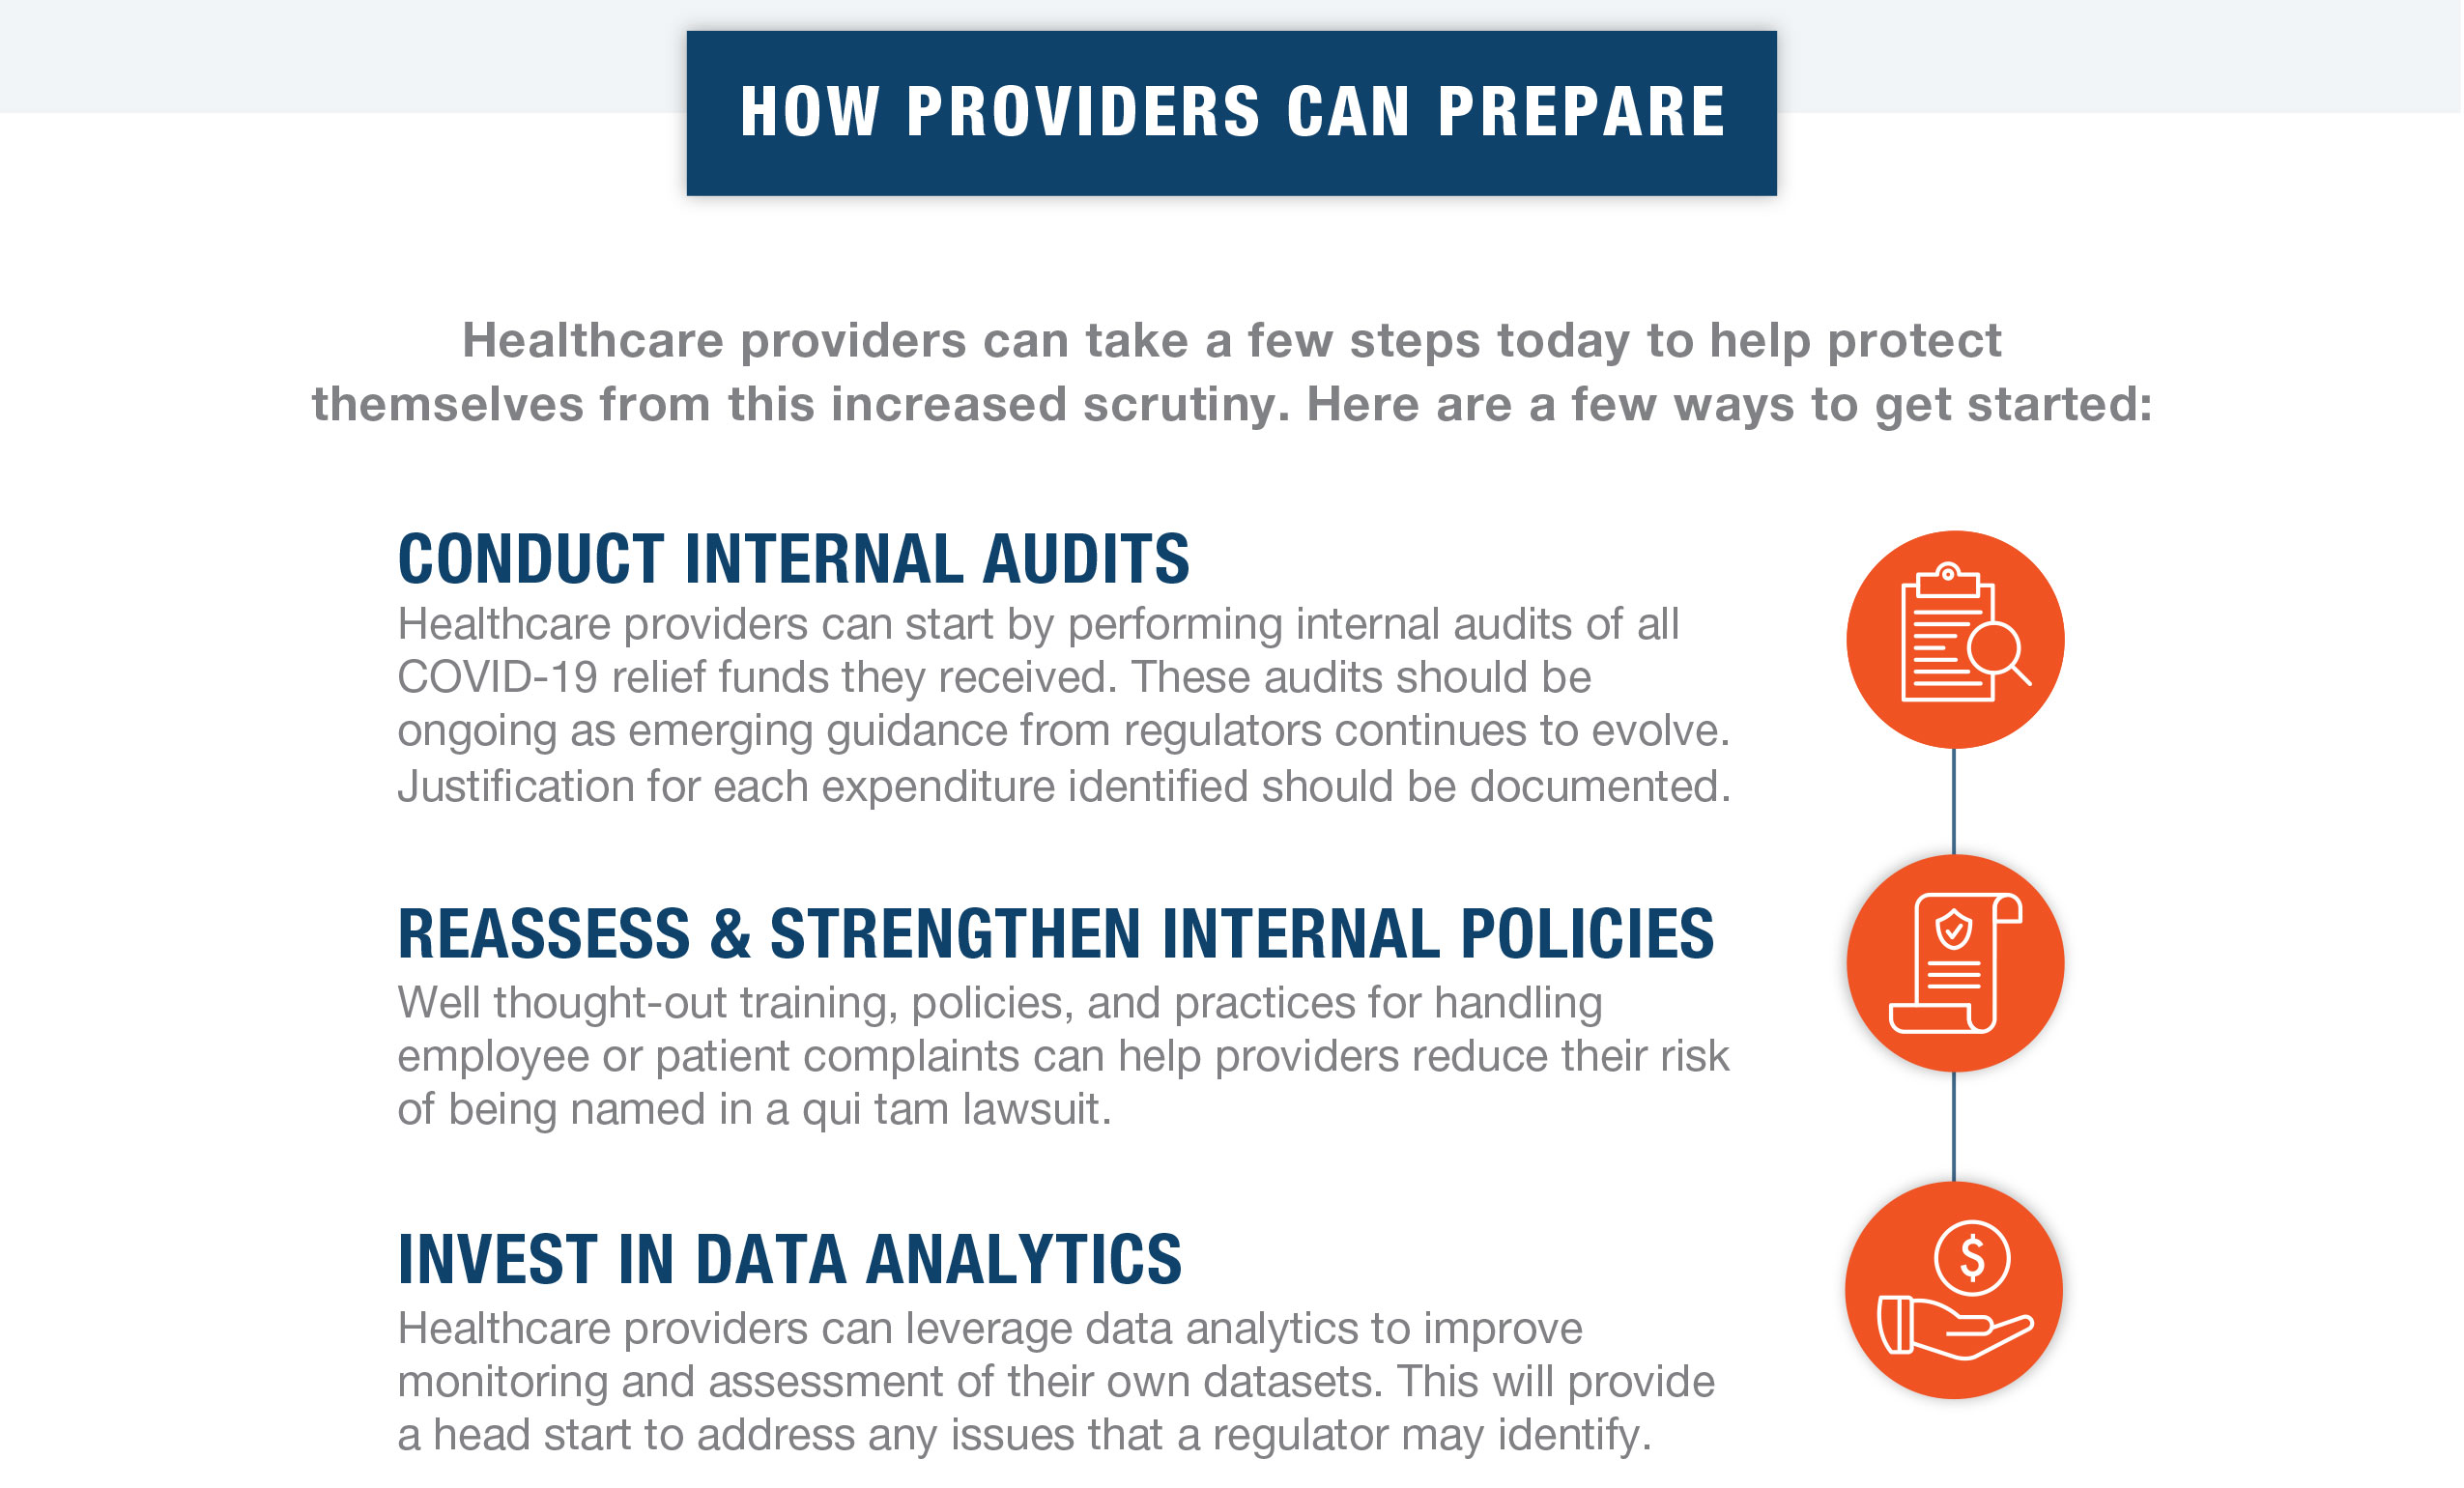 HOW PROVIDERS CAN PREPARE

Healthcare providers can take a few steps today to help protect themselves from this increased scrutiny. Here are a few ways to get started:

CONDUCT INTERNAL AUDITS
Healthcare providers can start by performing internal audits of all COVID-19 relief funds they received. These audits should be ongoing as emerging guidance from regulators continues to evolve.  Justification for each expenditure identified should be documented.

REASSESS & STRENGTHEN INTERNAL POLICIES
Well thought-out training, policies, and practices for handling employee or patient complaints can help providers reduce their risk of being named in a qui tam lawsuit.

INVEST IN DATA ANALYTICS
Healthcare providers can leverage data analytics to improve monitoring and assessment of their own datasets. This will provide a head start to address any issues that a regulator may identify.